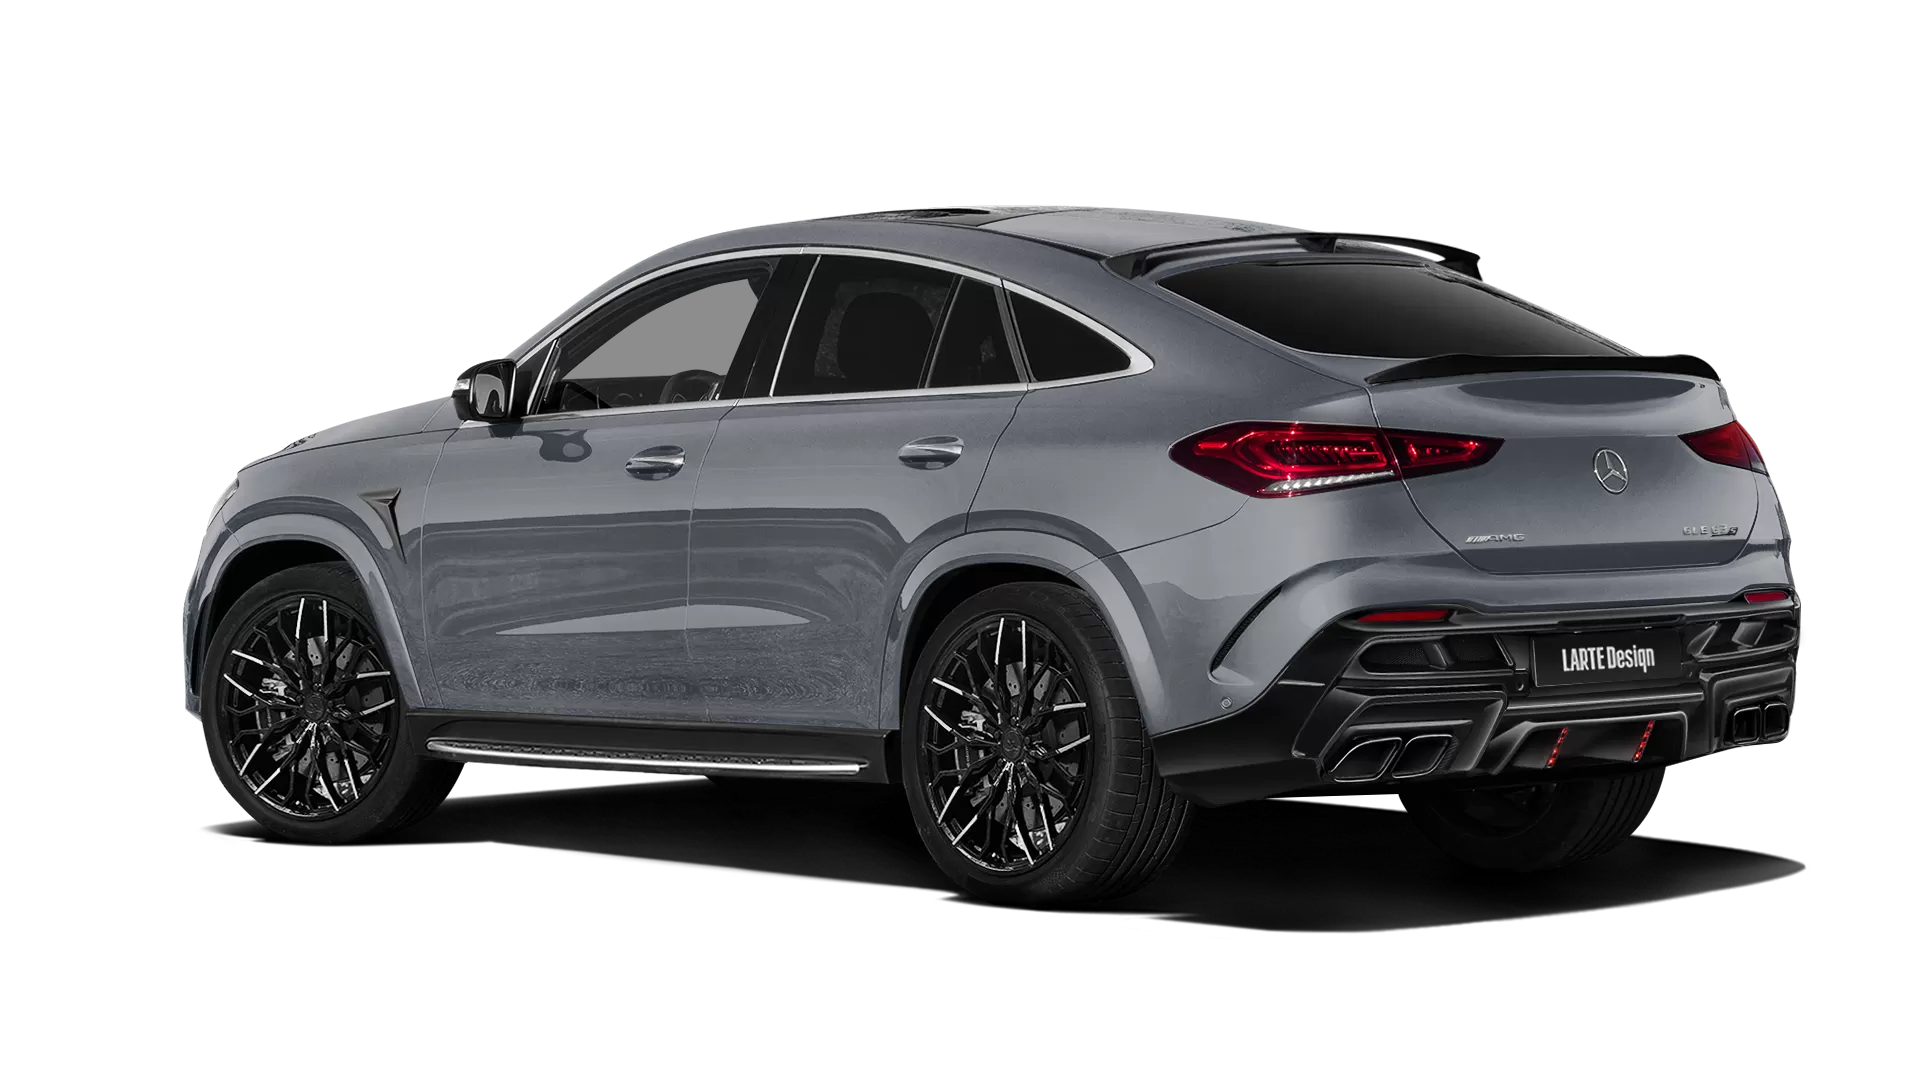 Mercedes GLE Coupe AMG 63 C167 with painted body kit: rear view shown in Selenite Grey